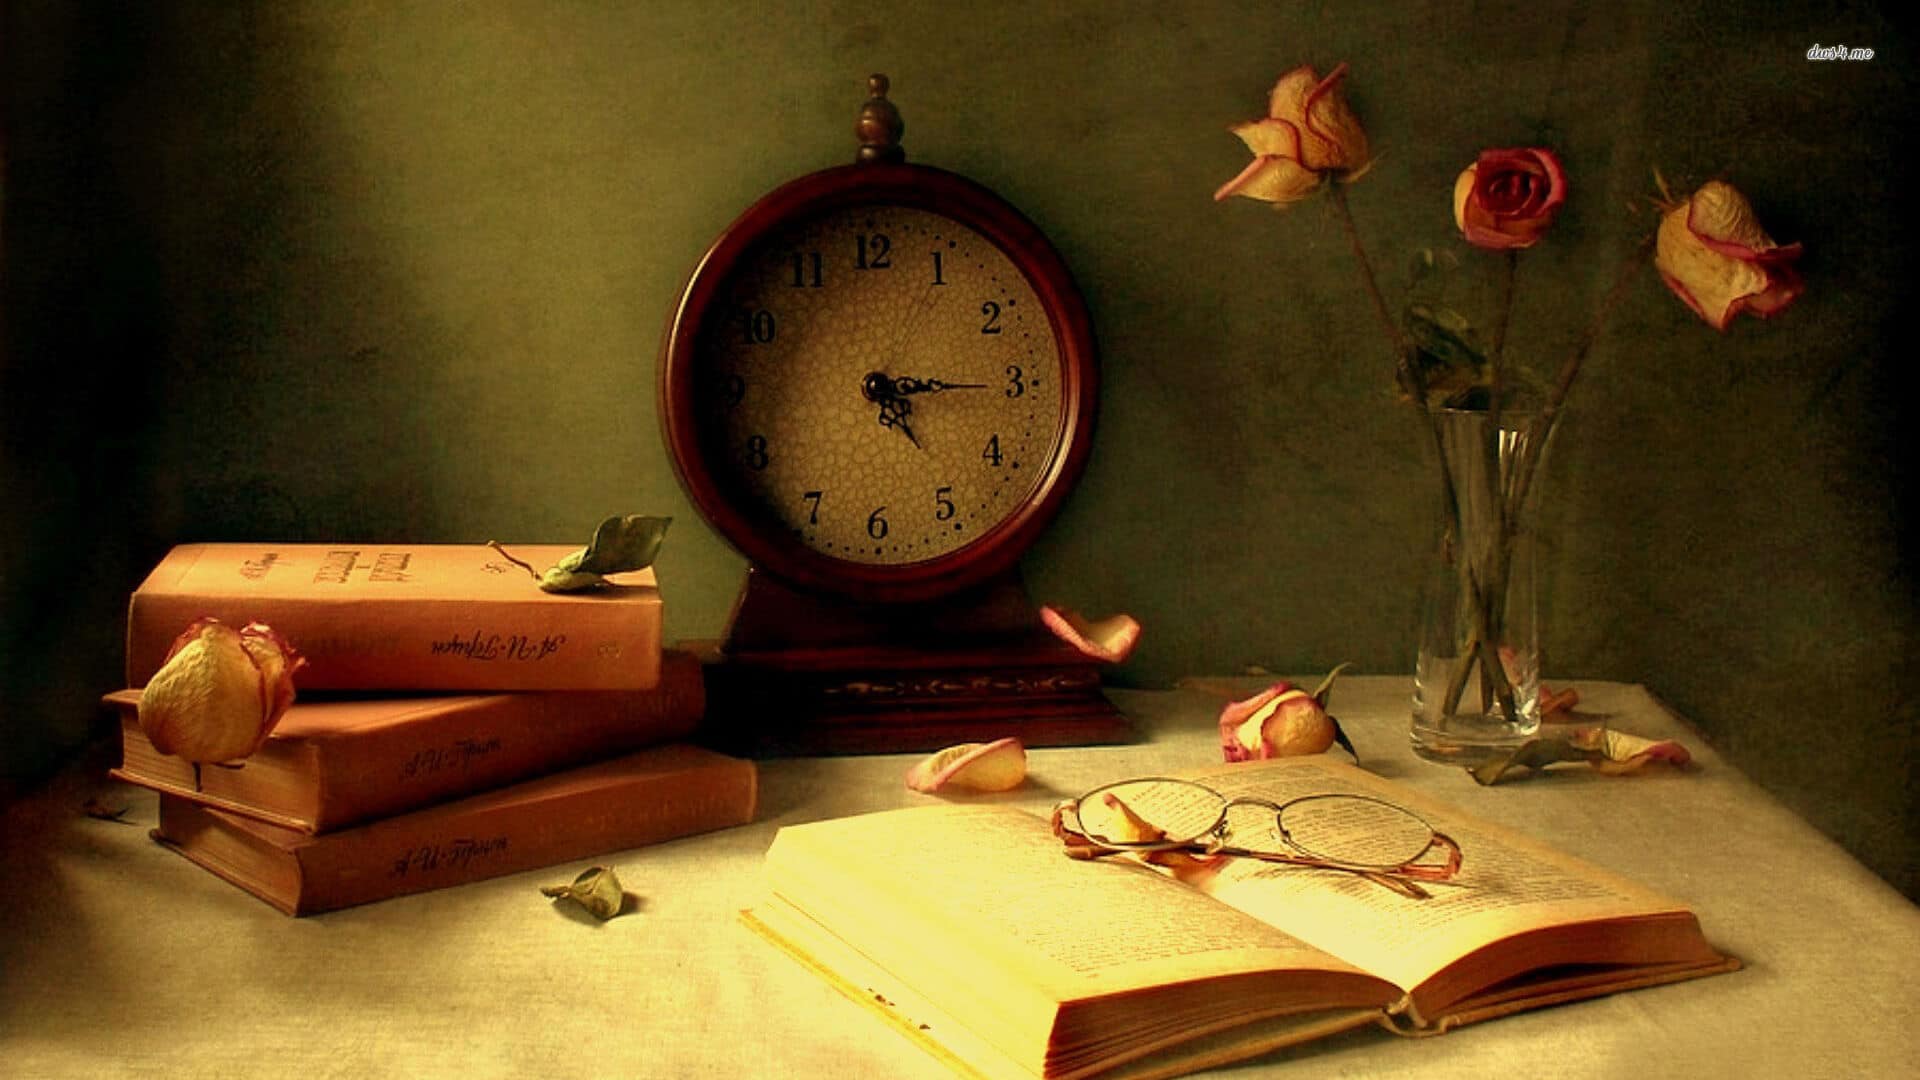 14044-books-on-the-table-1920×1080-photography-wallpaper